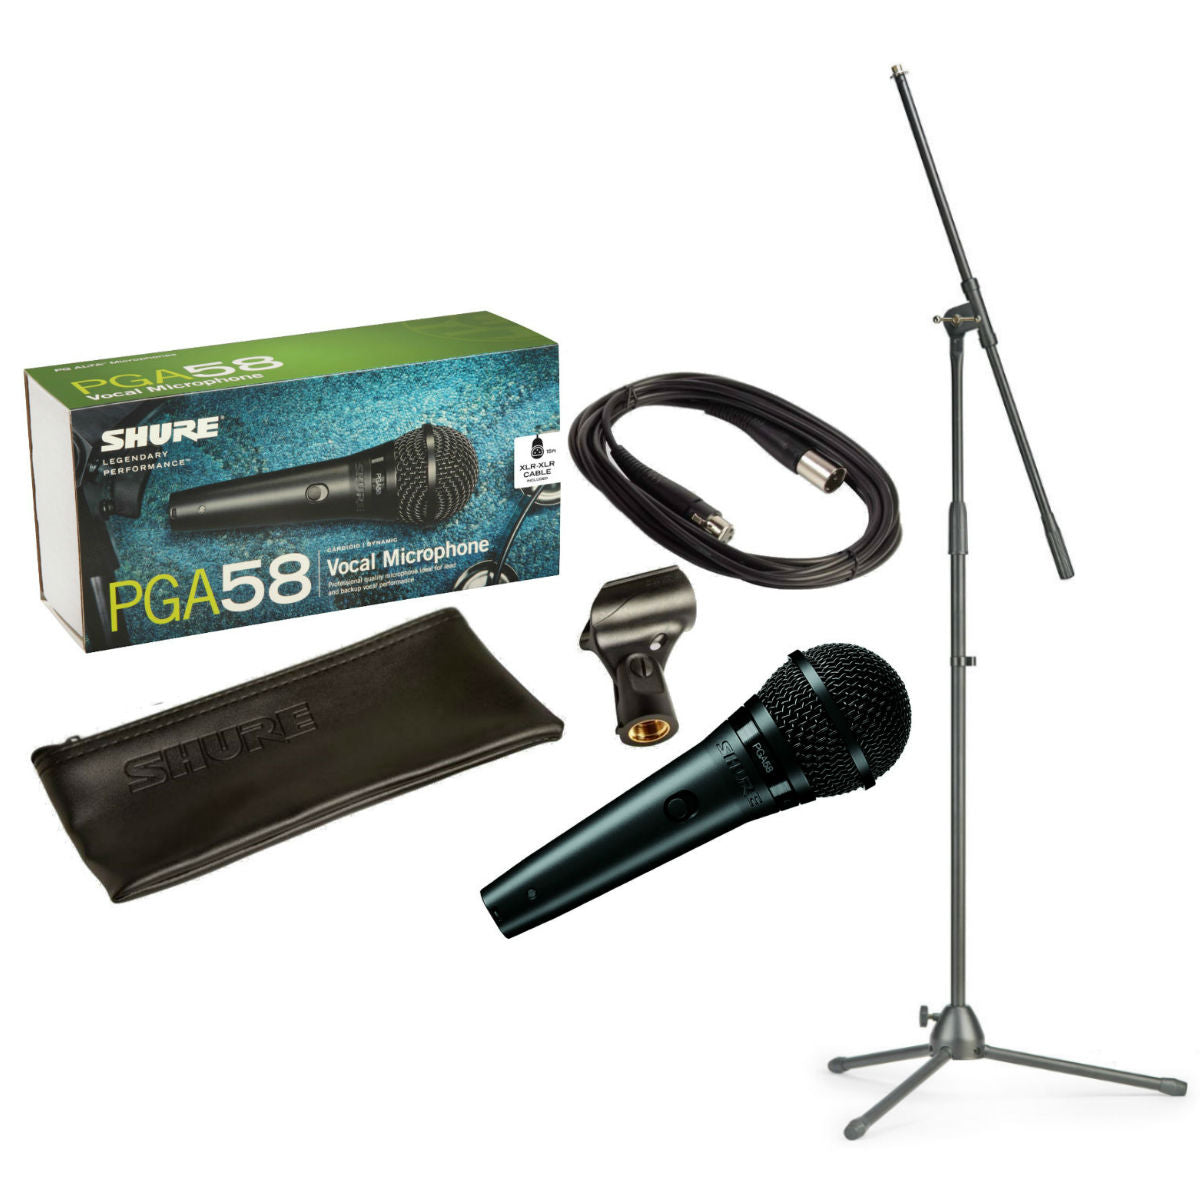 Shure PGA58 Vocal Microphone with XLR Cable & Microphone Stand